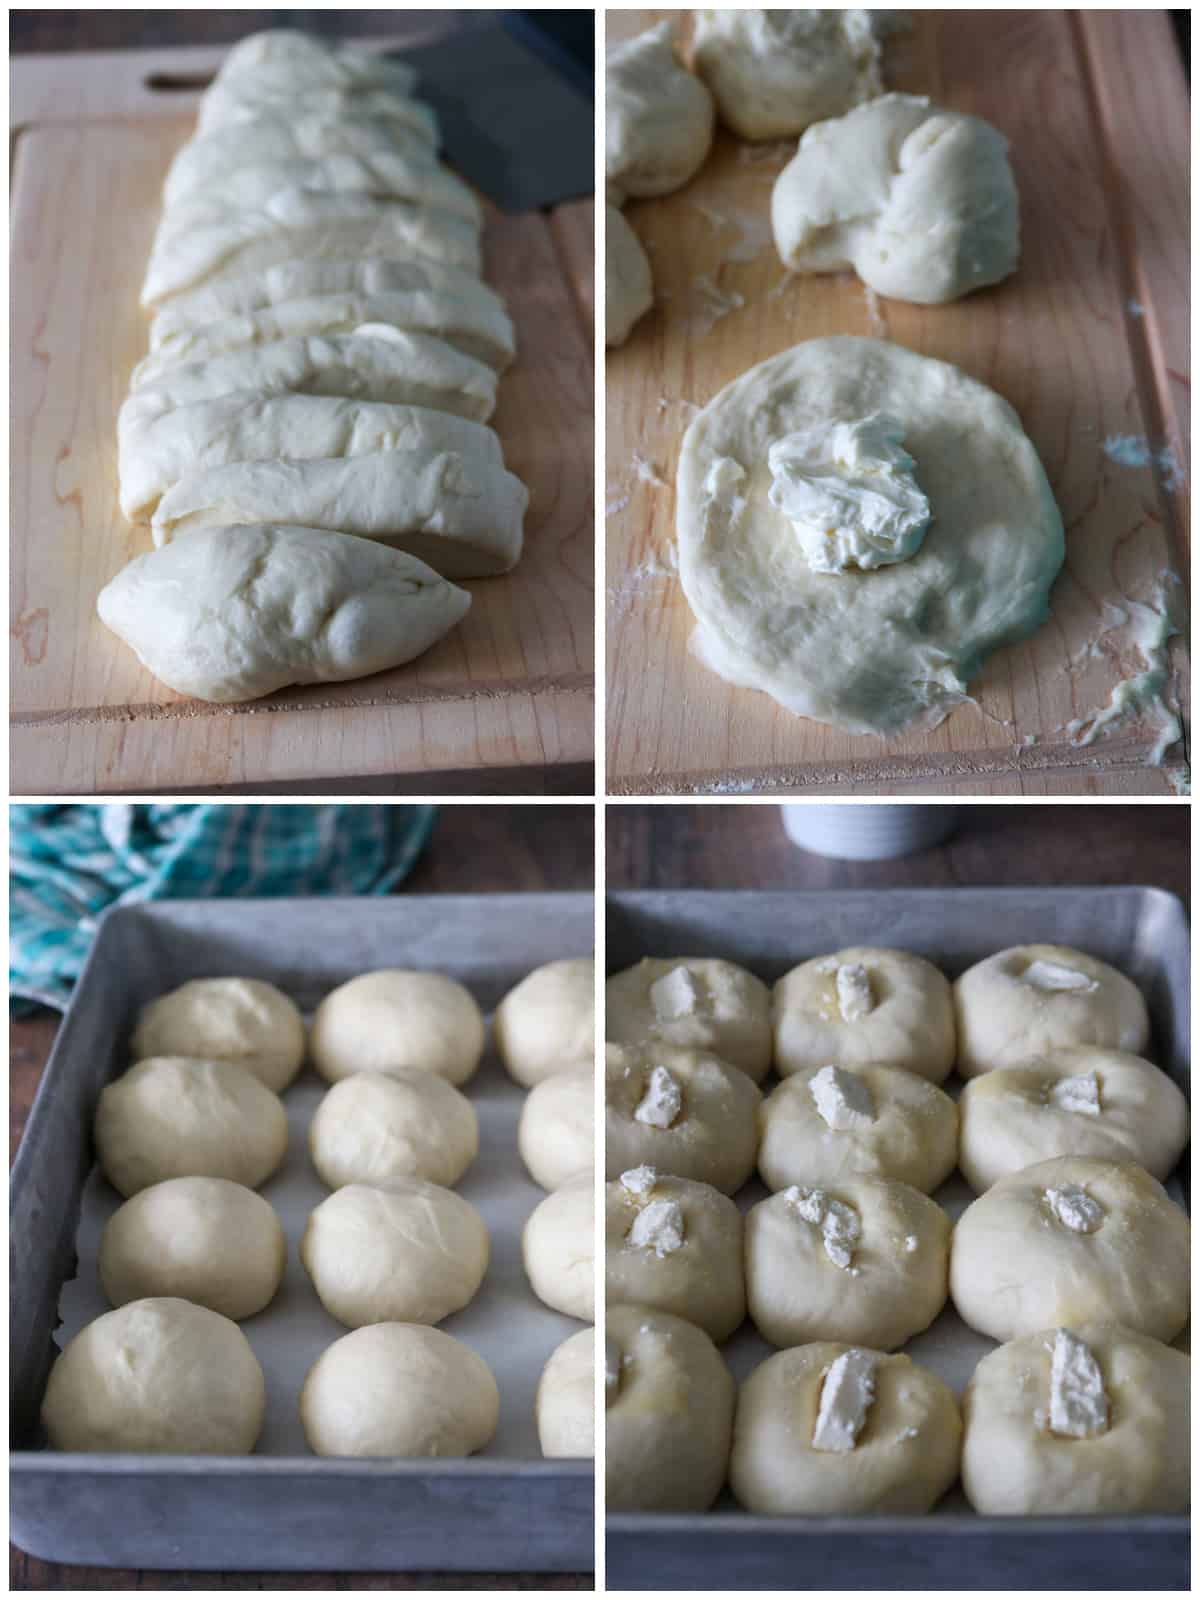 A collage showing the process of shaping the cream cheese buns.